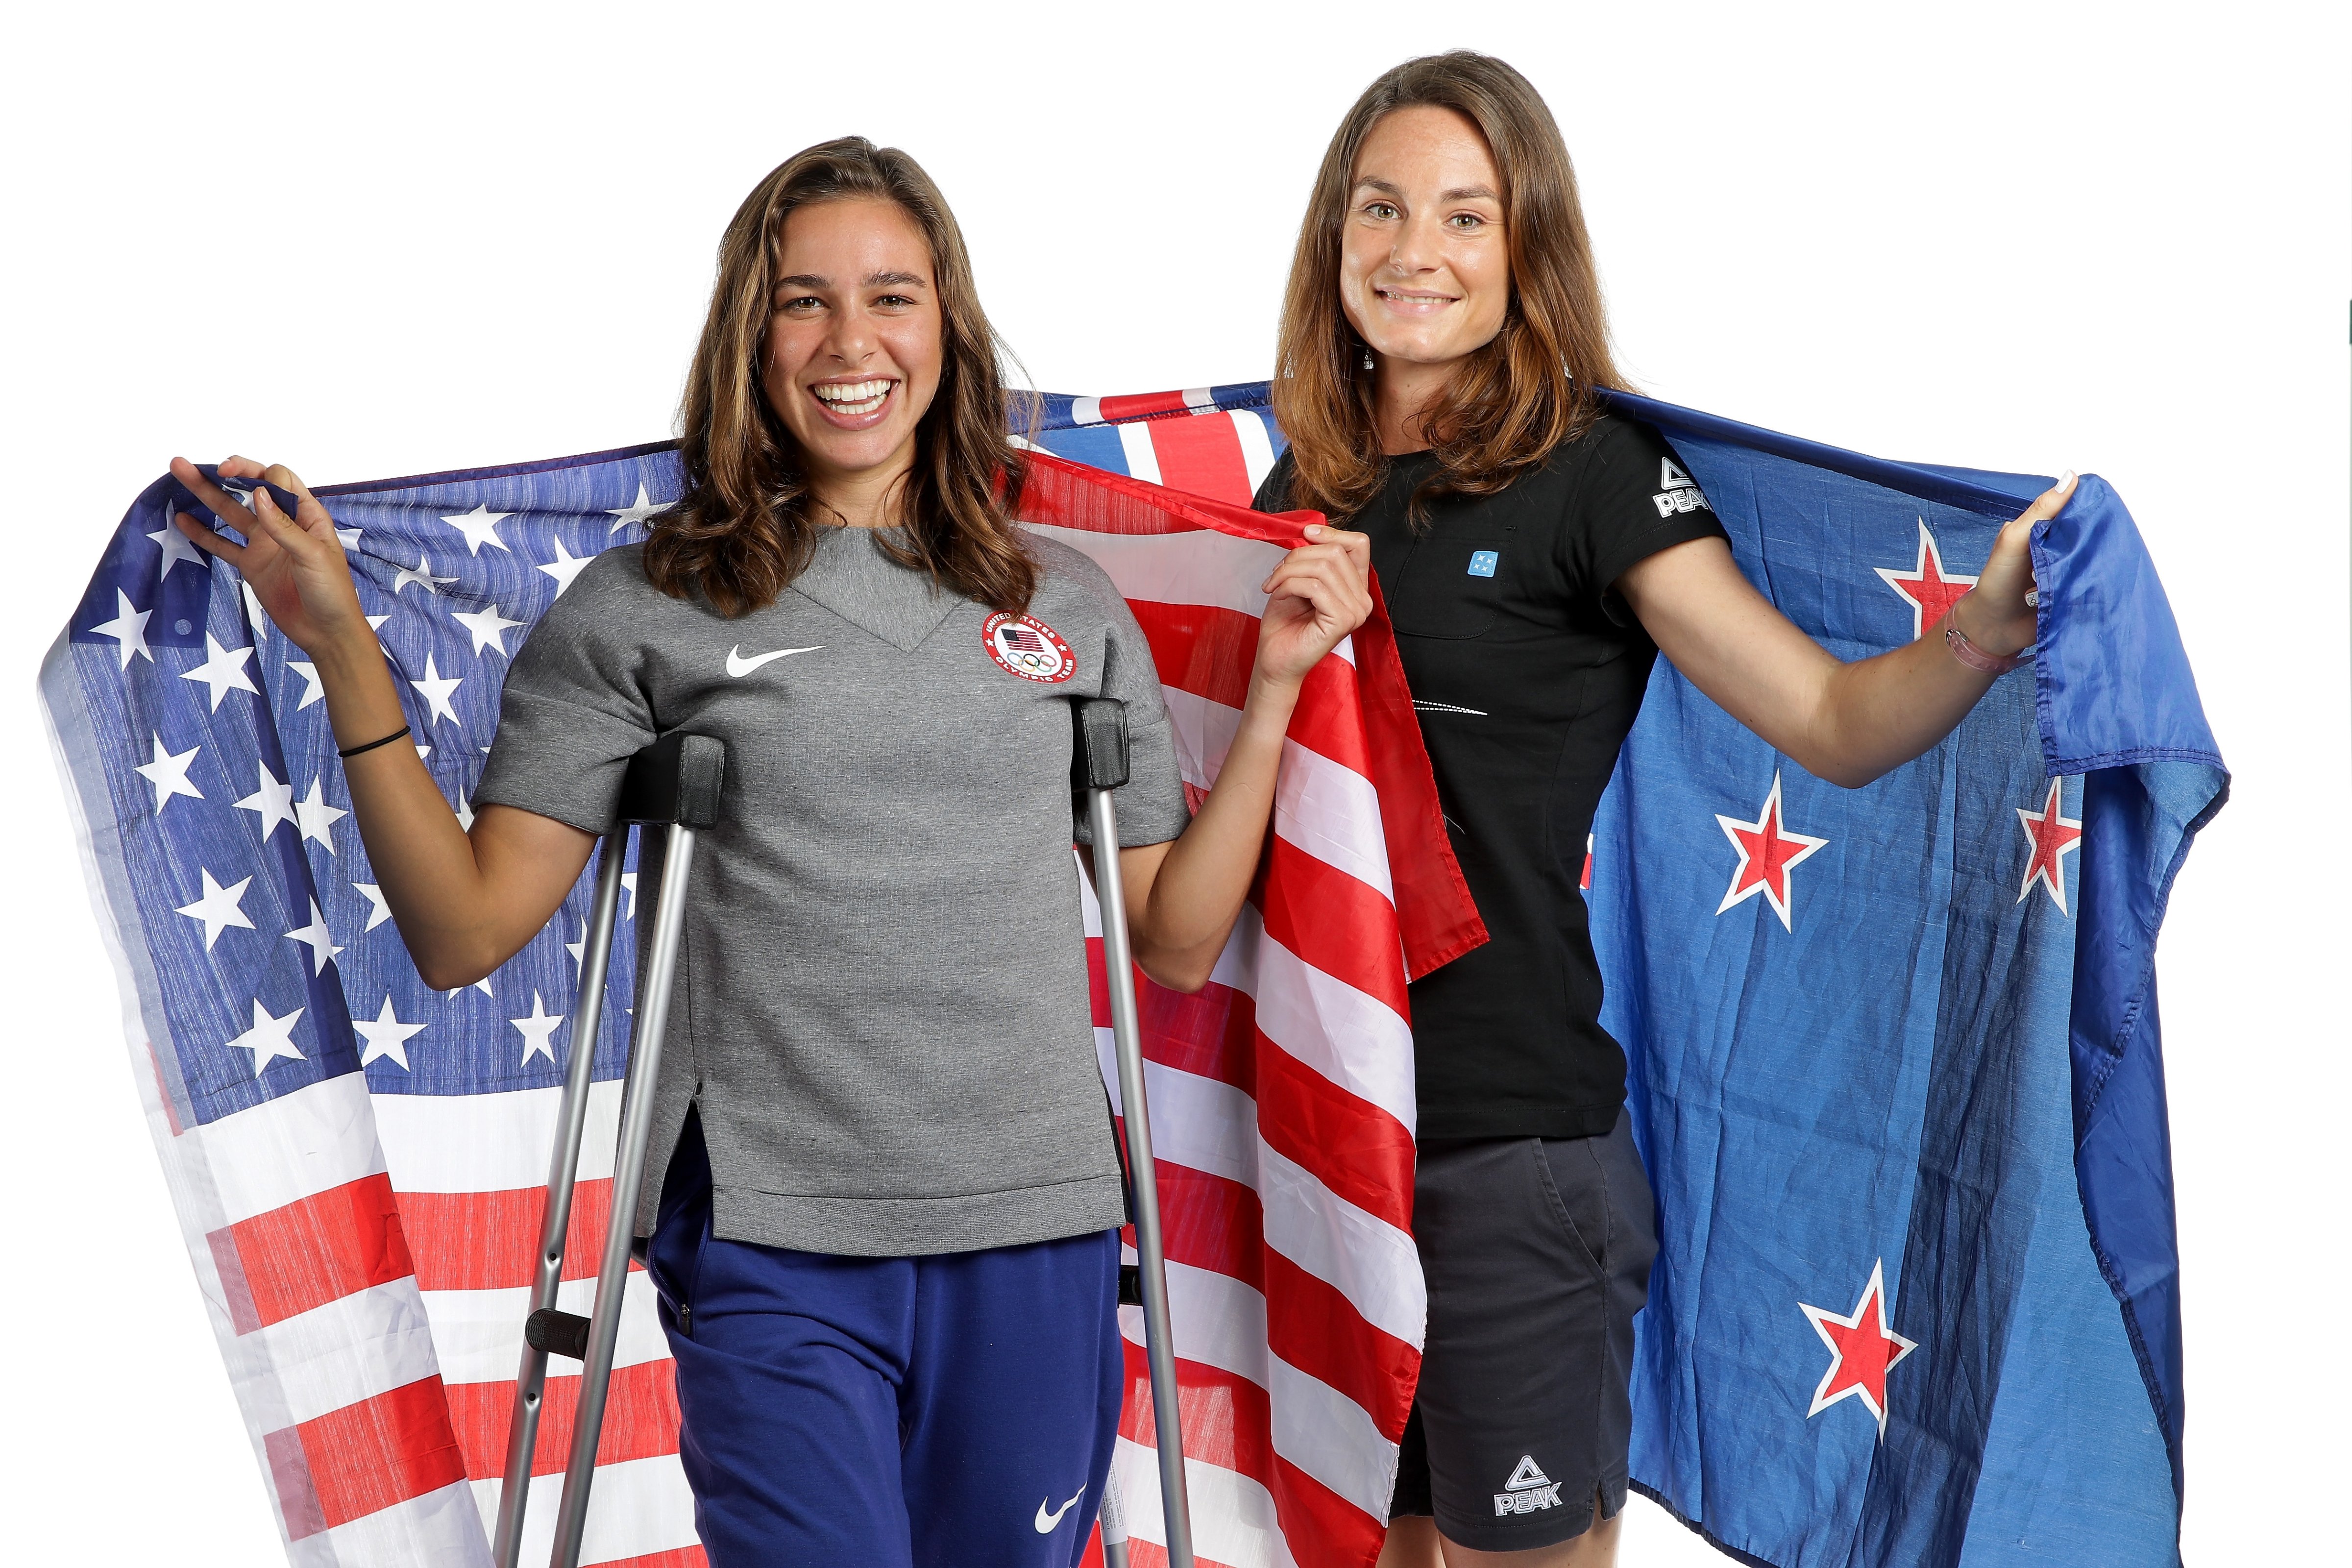 RIO DE JANEIRO, BRAZIL - AUGUST 17:  New Zealand distance runner, Nikki Hamblin and American runner, Abbey D'Agostino pose for a portrait on August 17, 2016 in Rio de Janeiro, Brazil. Hamblin and D'Agostino came last in their 5000m heat on Tuesday after they collided and fell midway through their race. The pair have been commended for their sportsmanship after they helped each other up to finish the race.  (Photo by Chris Graythen/Getty Images) (Chris Graythen&mdash;Getty Images)